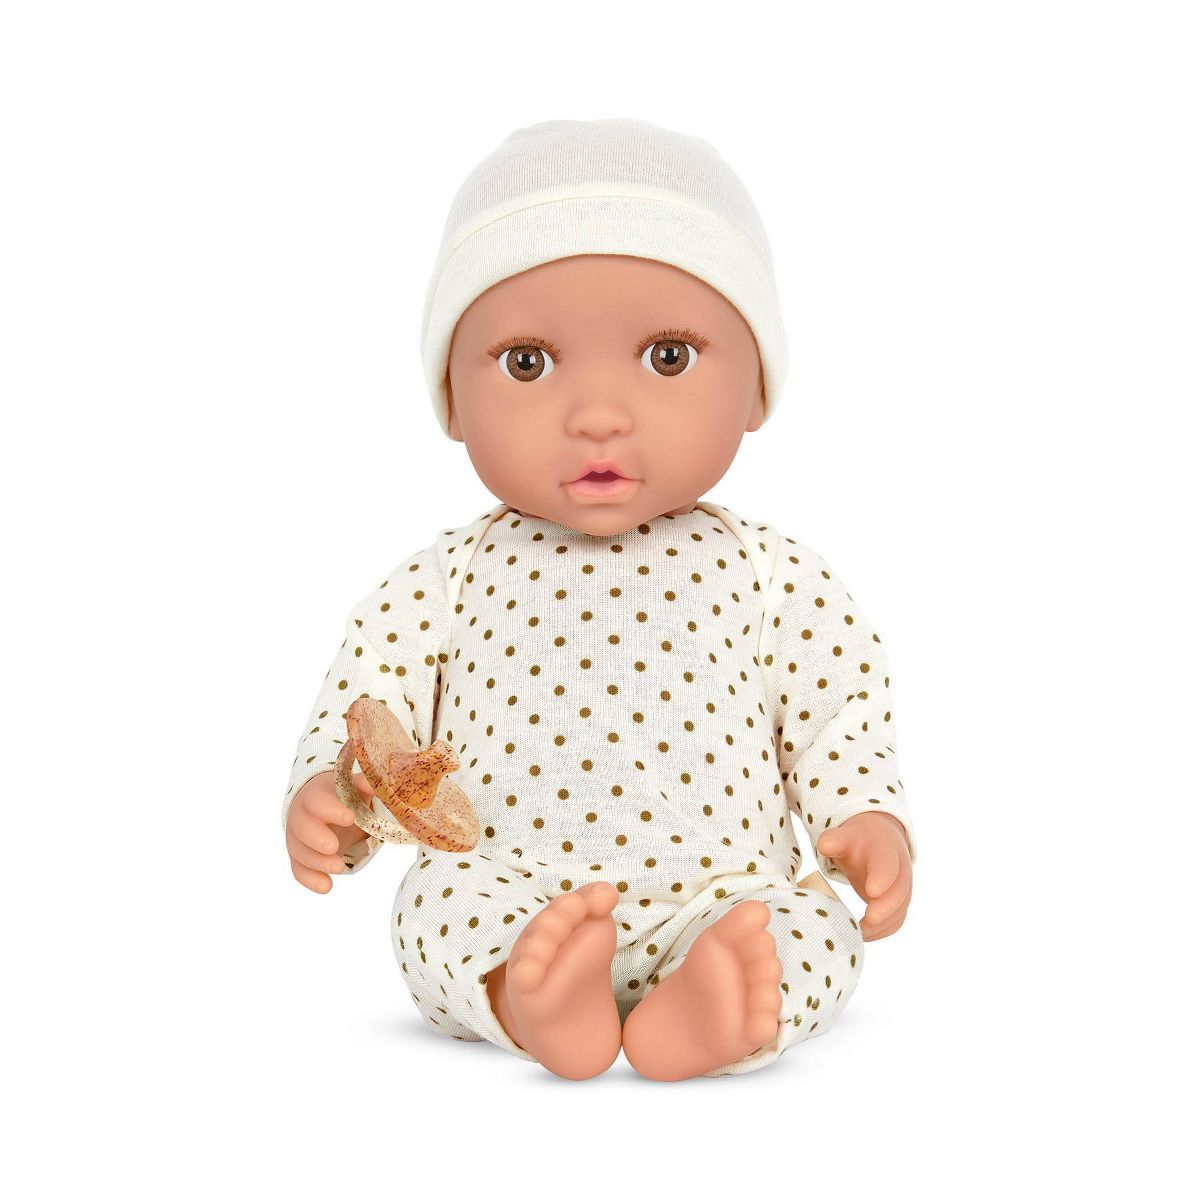 LullaBaby Doll With Polka Dot Ivory Pajama And Pacifier | Target